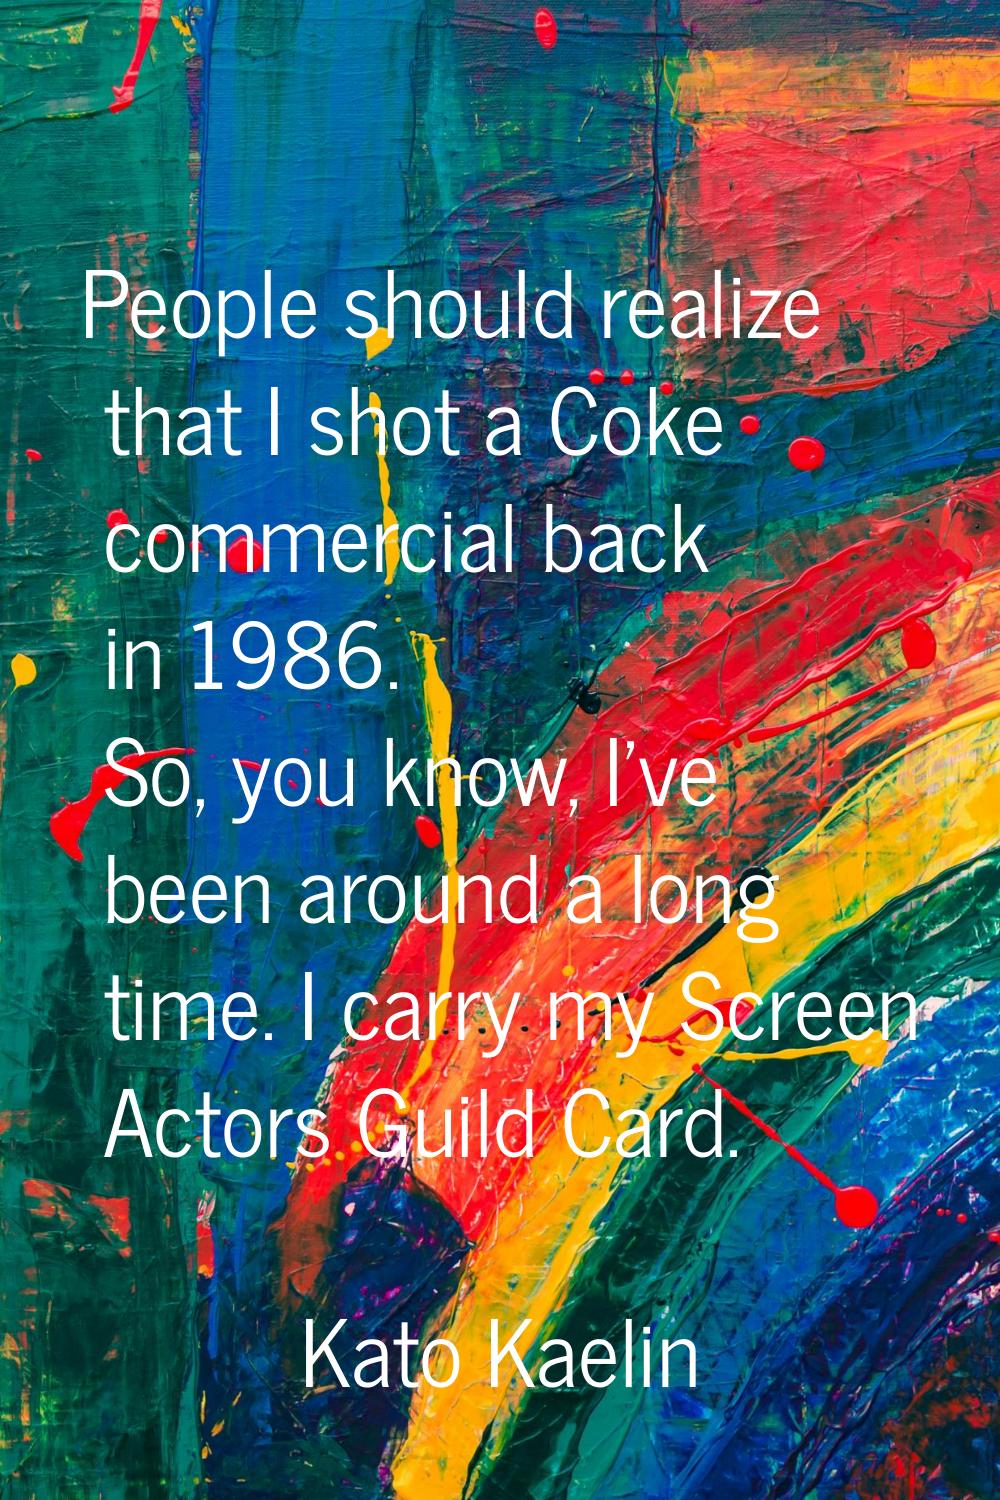 People should realize that I shot a Coke commercial back in 1986. So, you know, I've been around a 